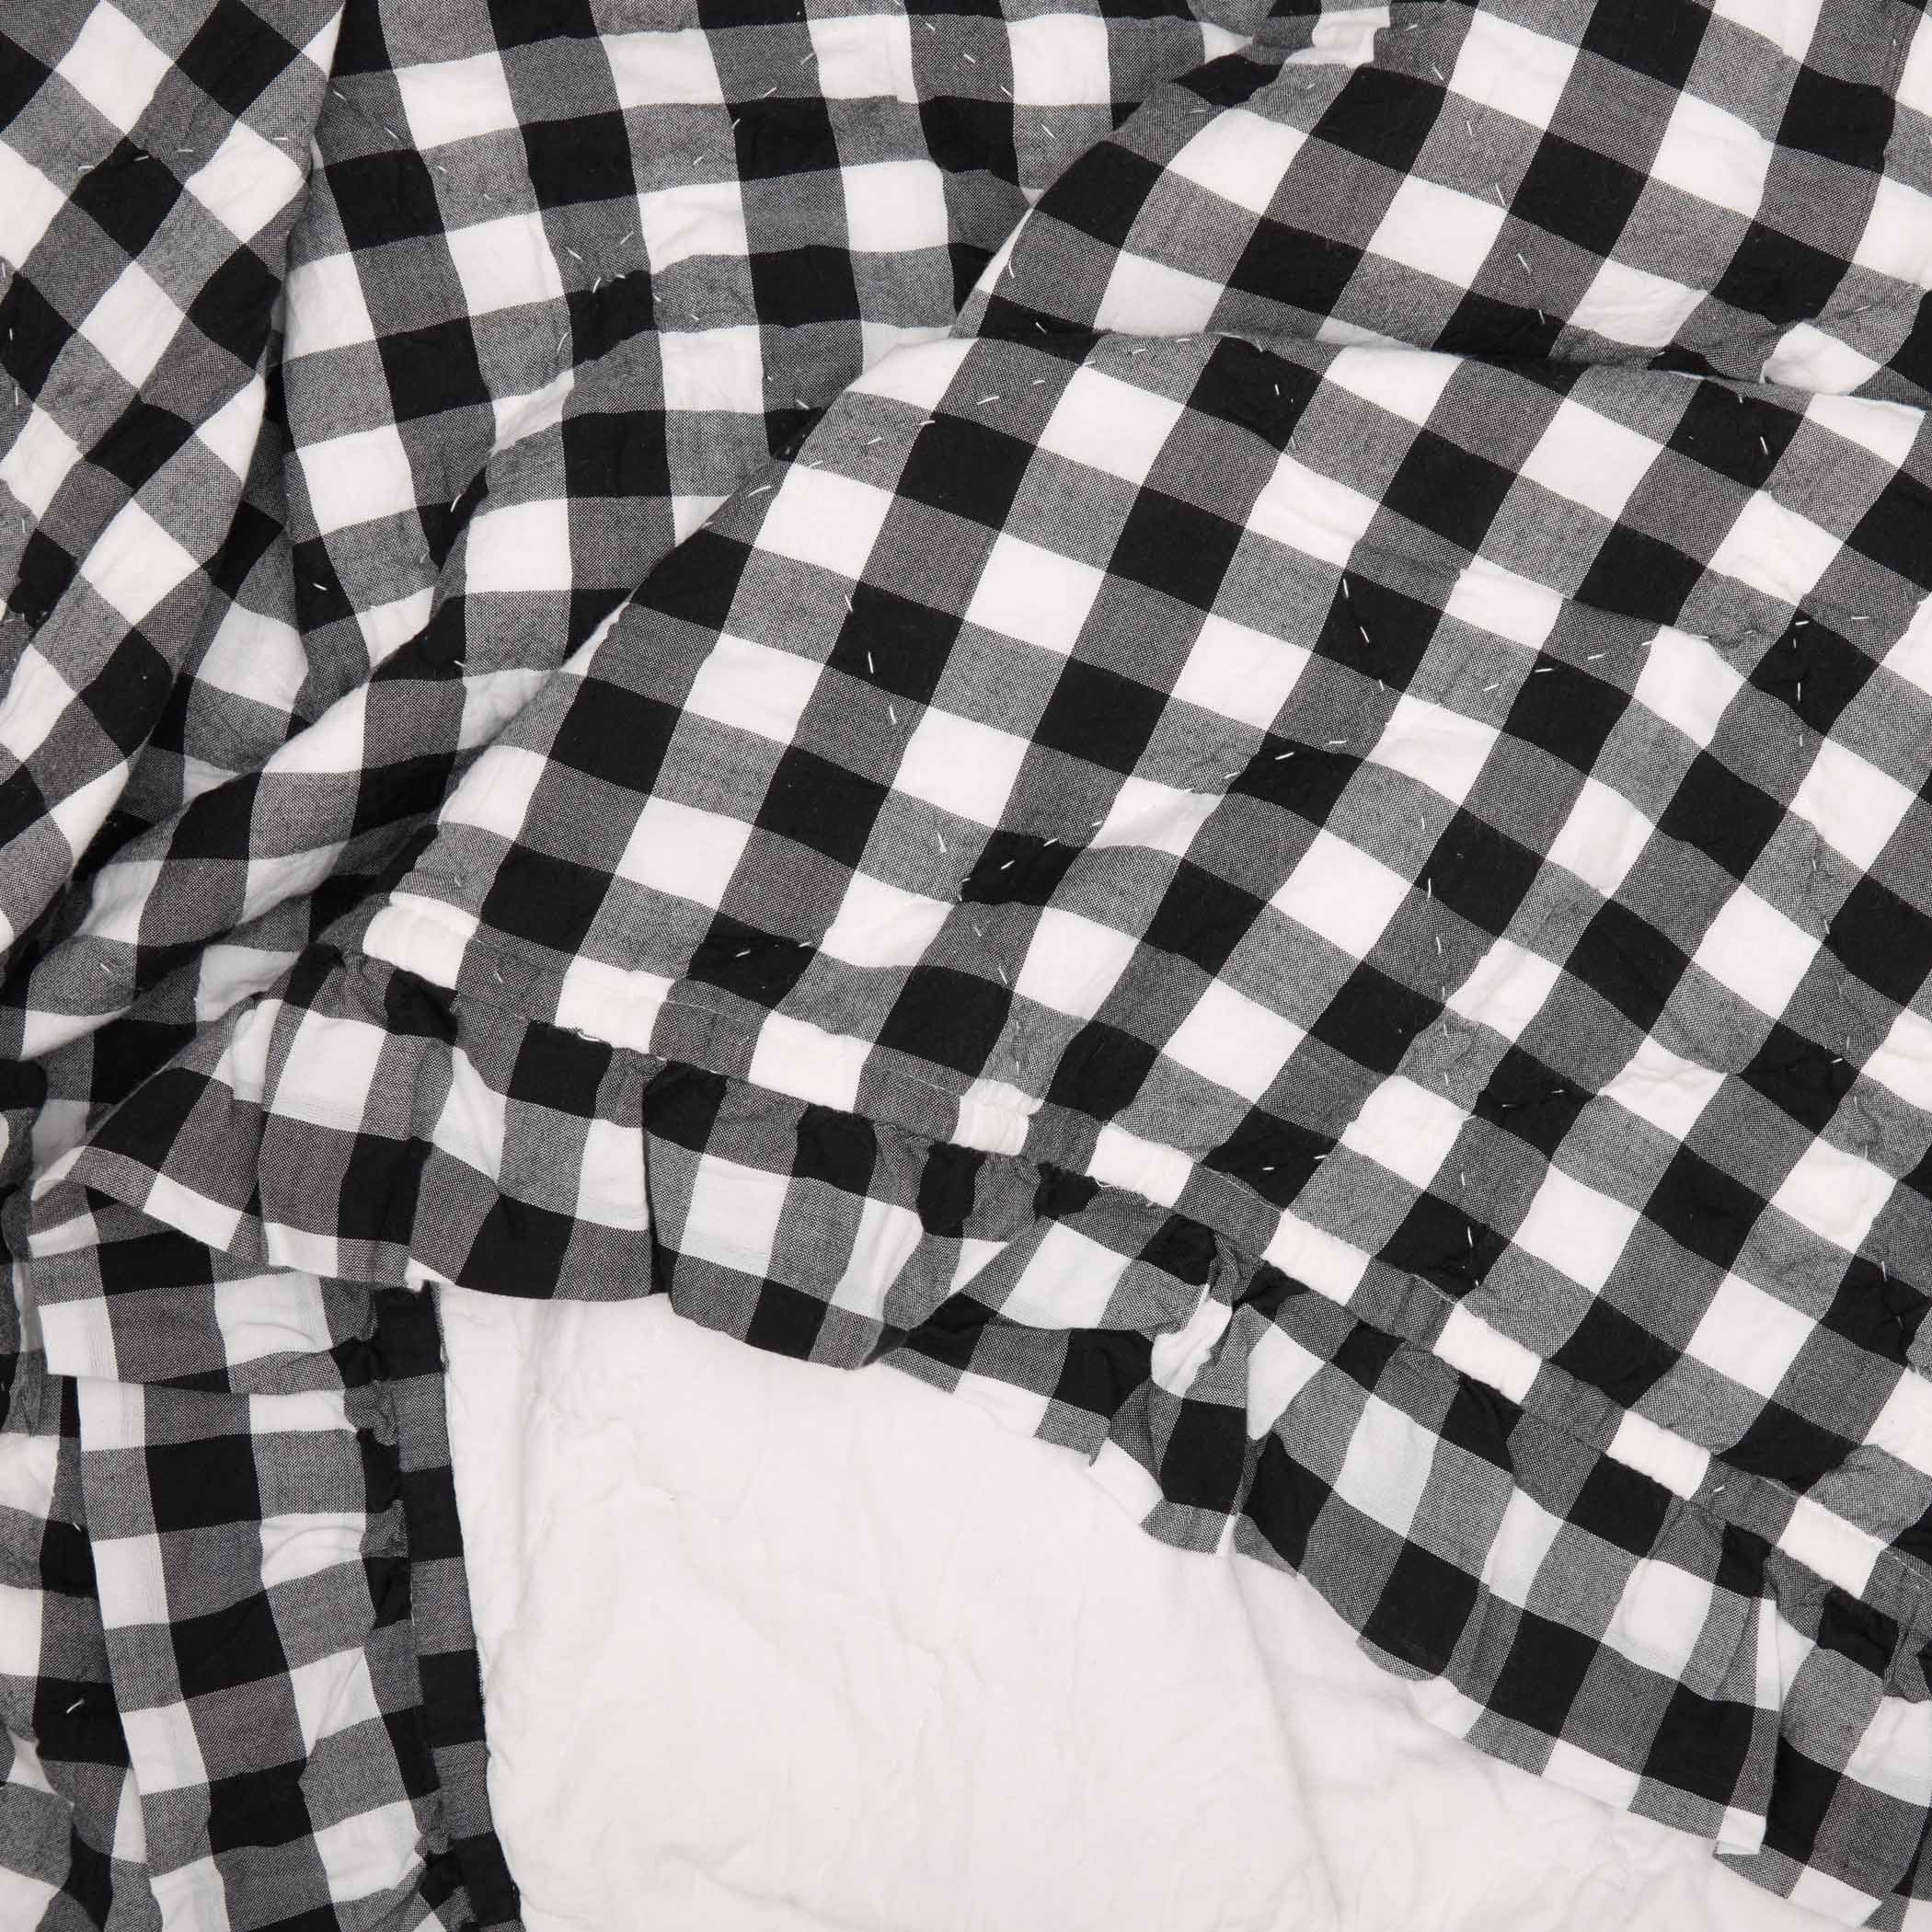 Annie Buffalo Black Check Ruffled Quilt Coverlet VHC Brands